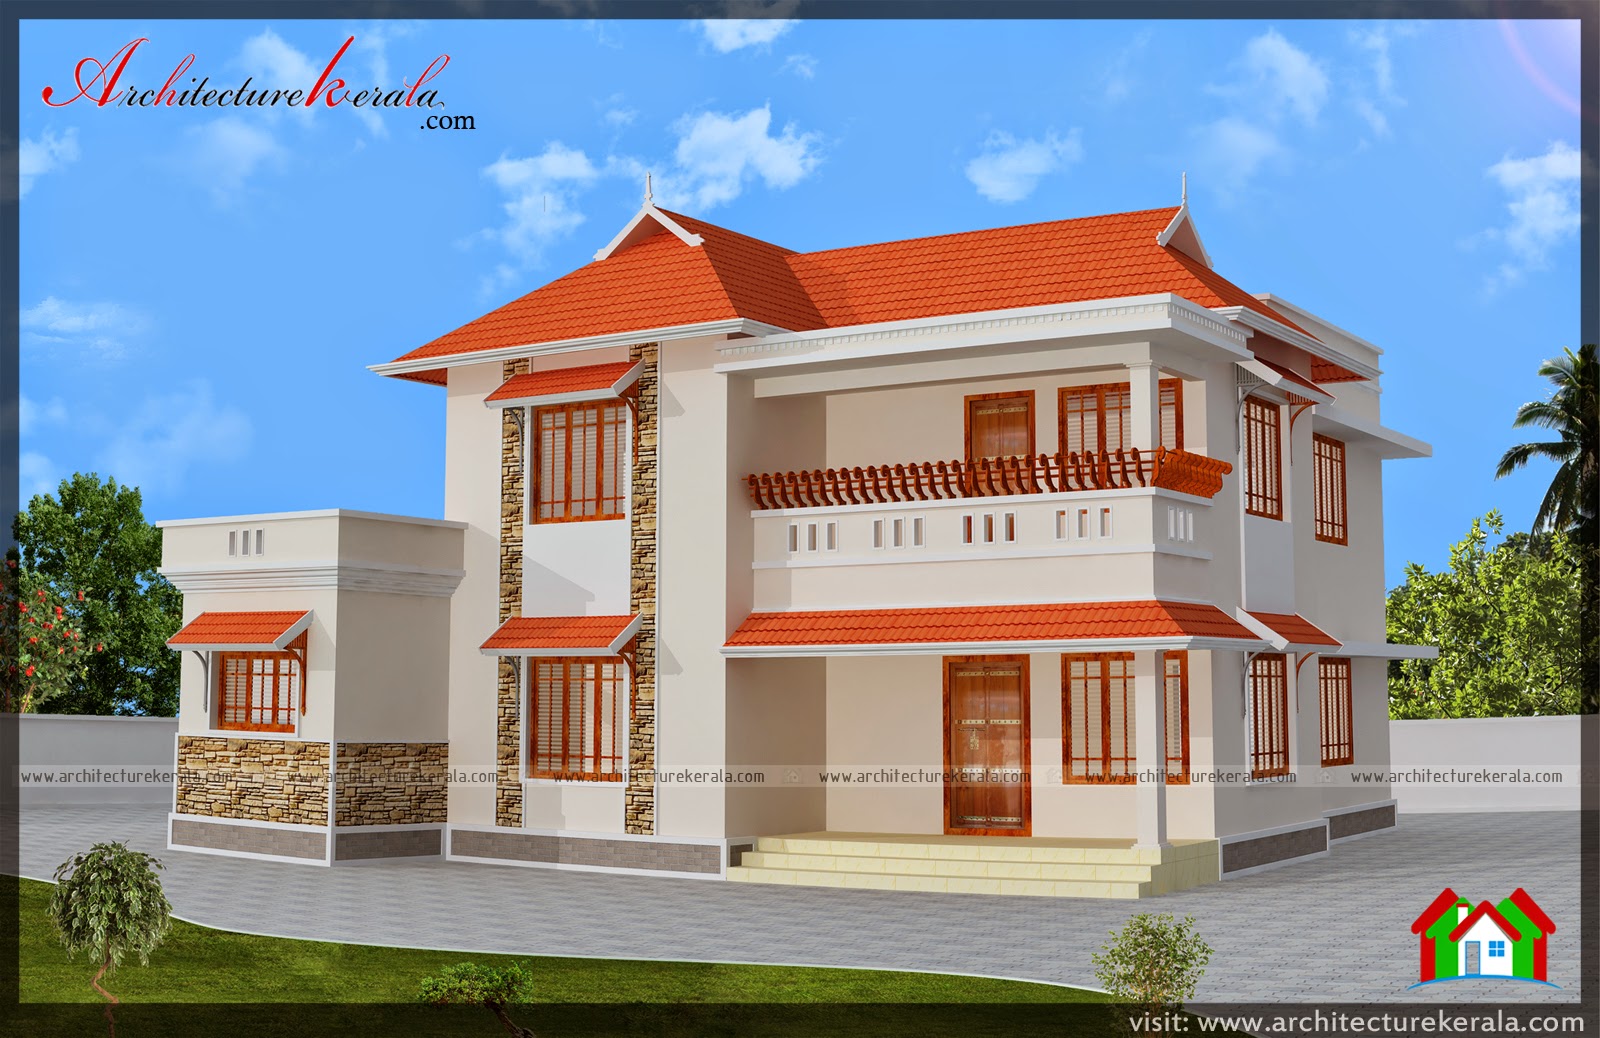  5  BEDROOM  IN 2000 SFT HOUSE  PLAN  ARCHITECTURE KERALA